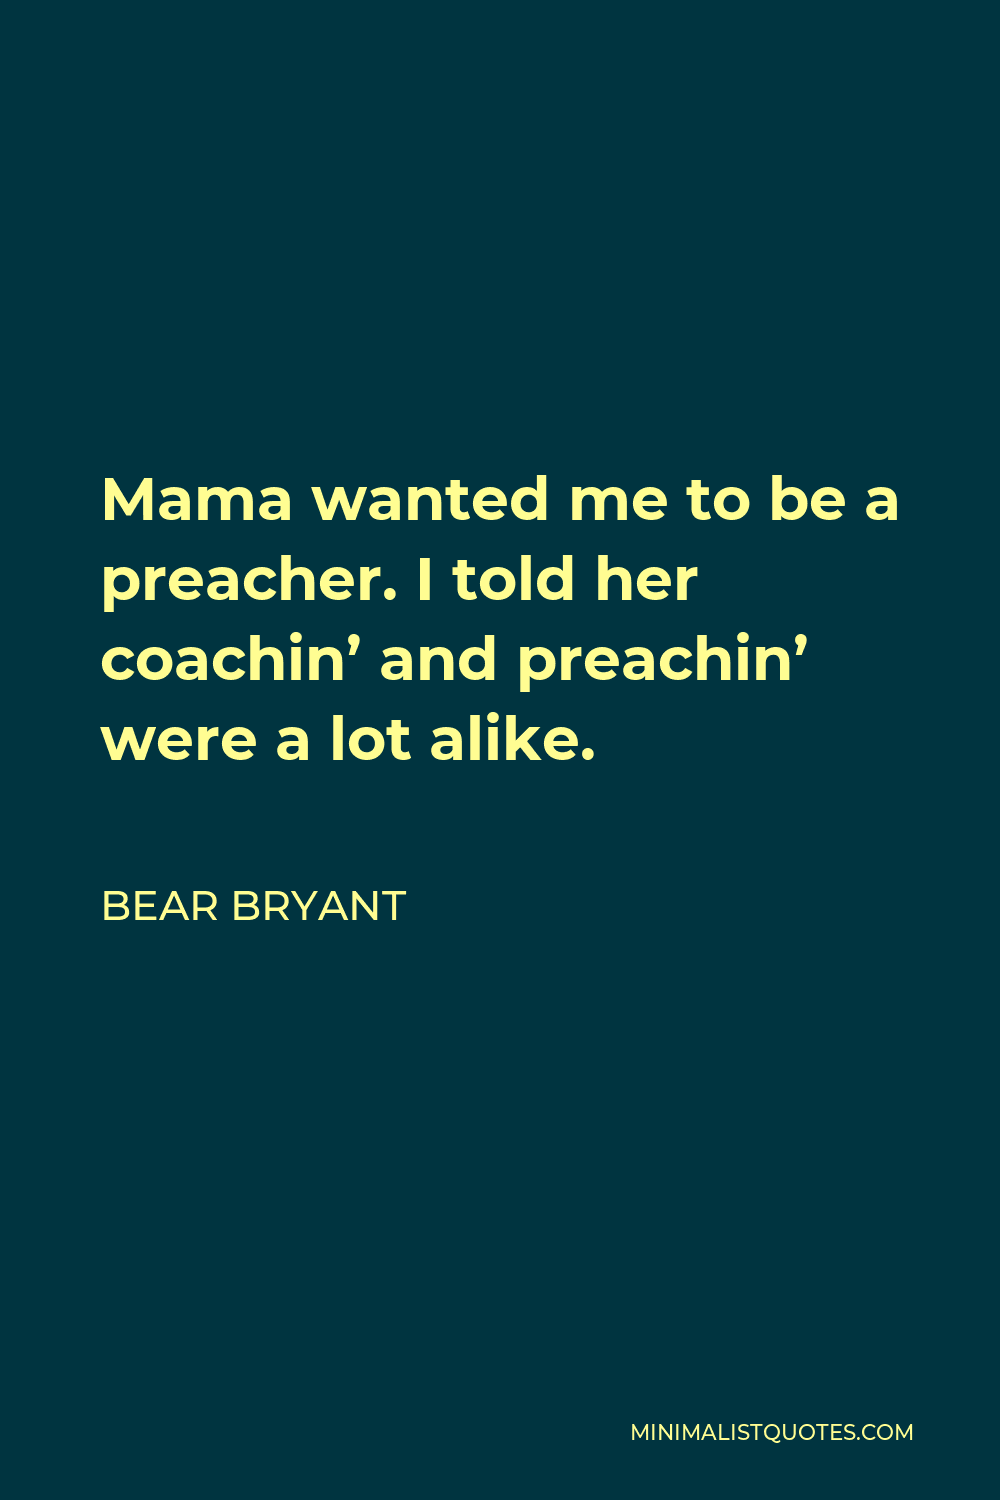 Bear Bryant Quote - Mama wanted me to be a preacher. I told her coachin’ and preachin’ were a lot alike.